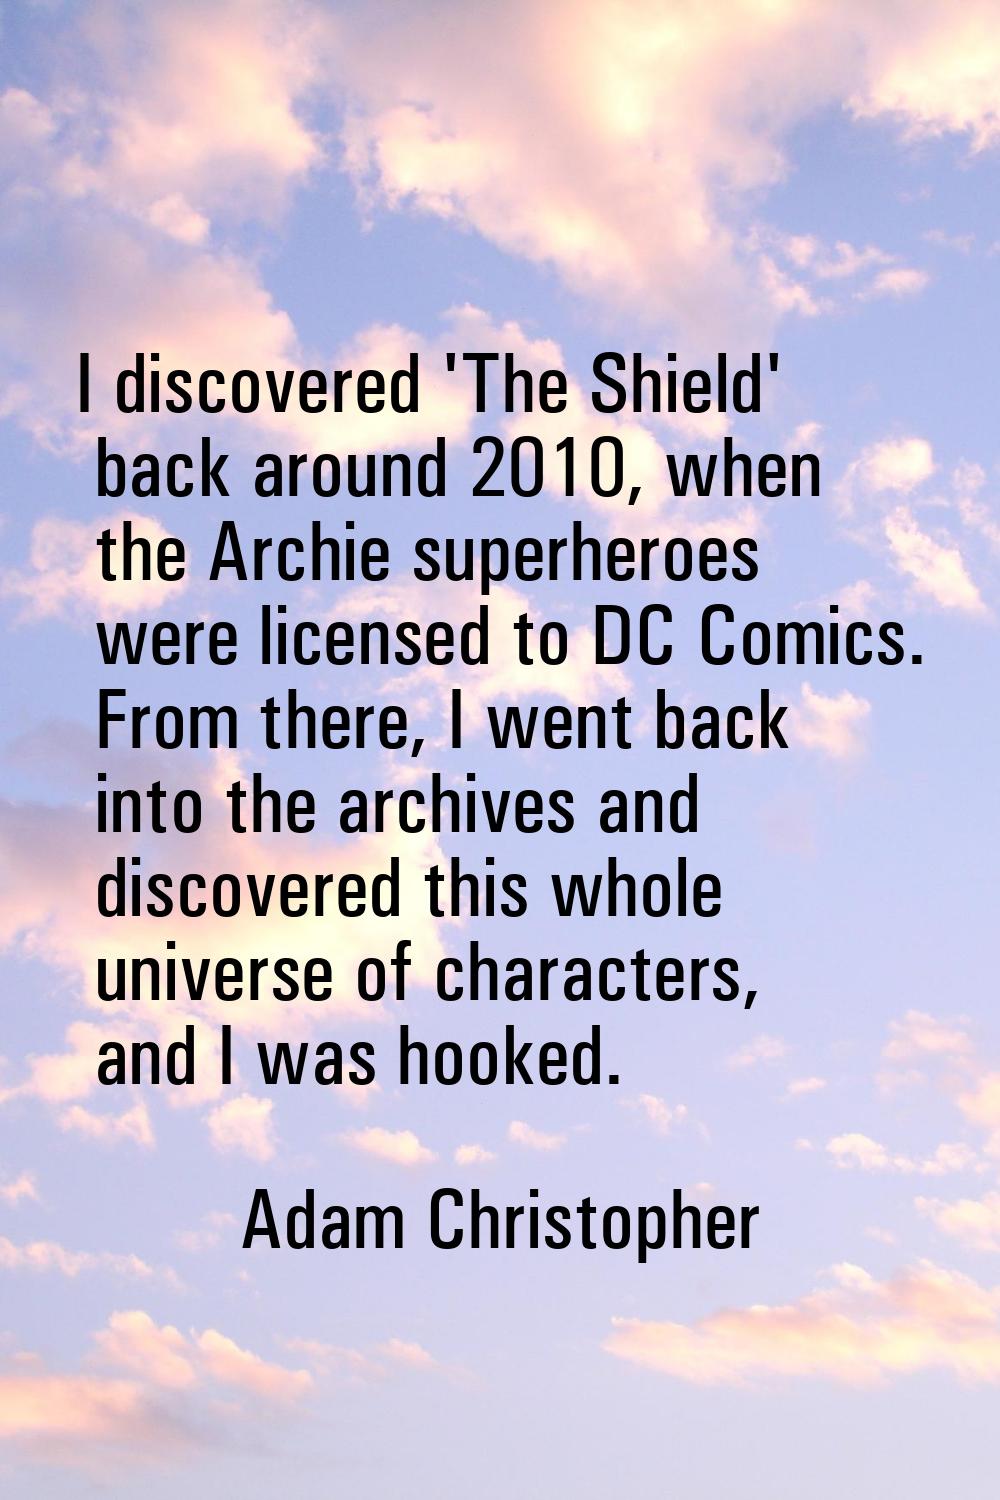 I discovered 'The Shield' back around 2010, when the Archie superheroes were licensed to DC Comics.